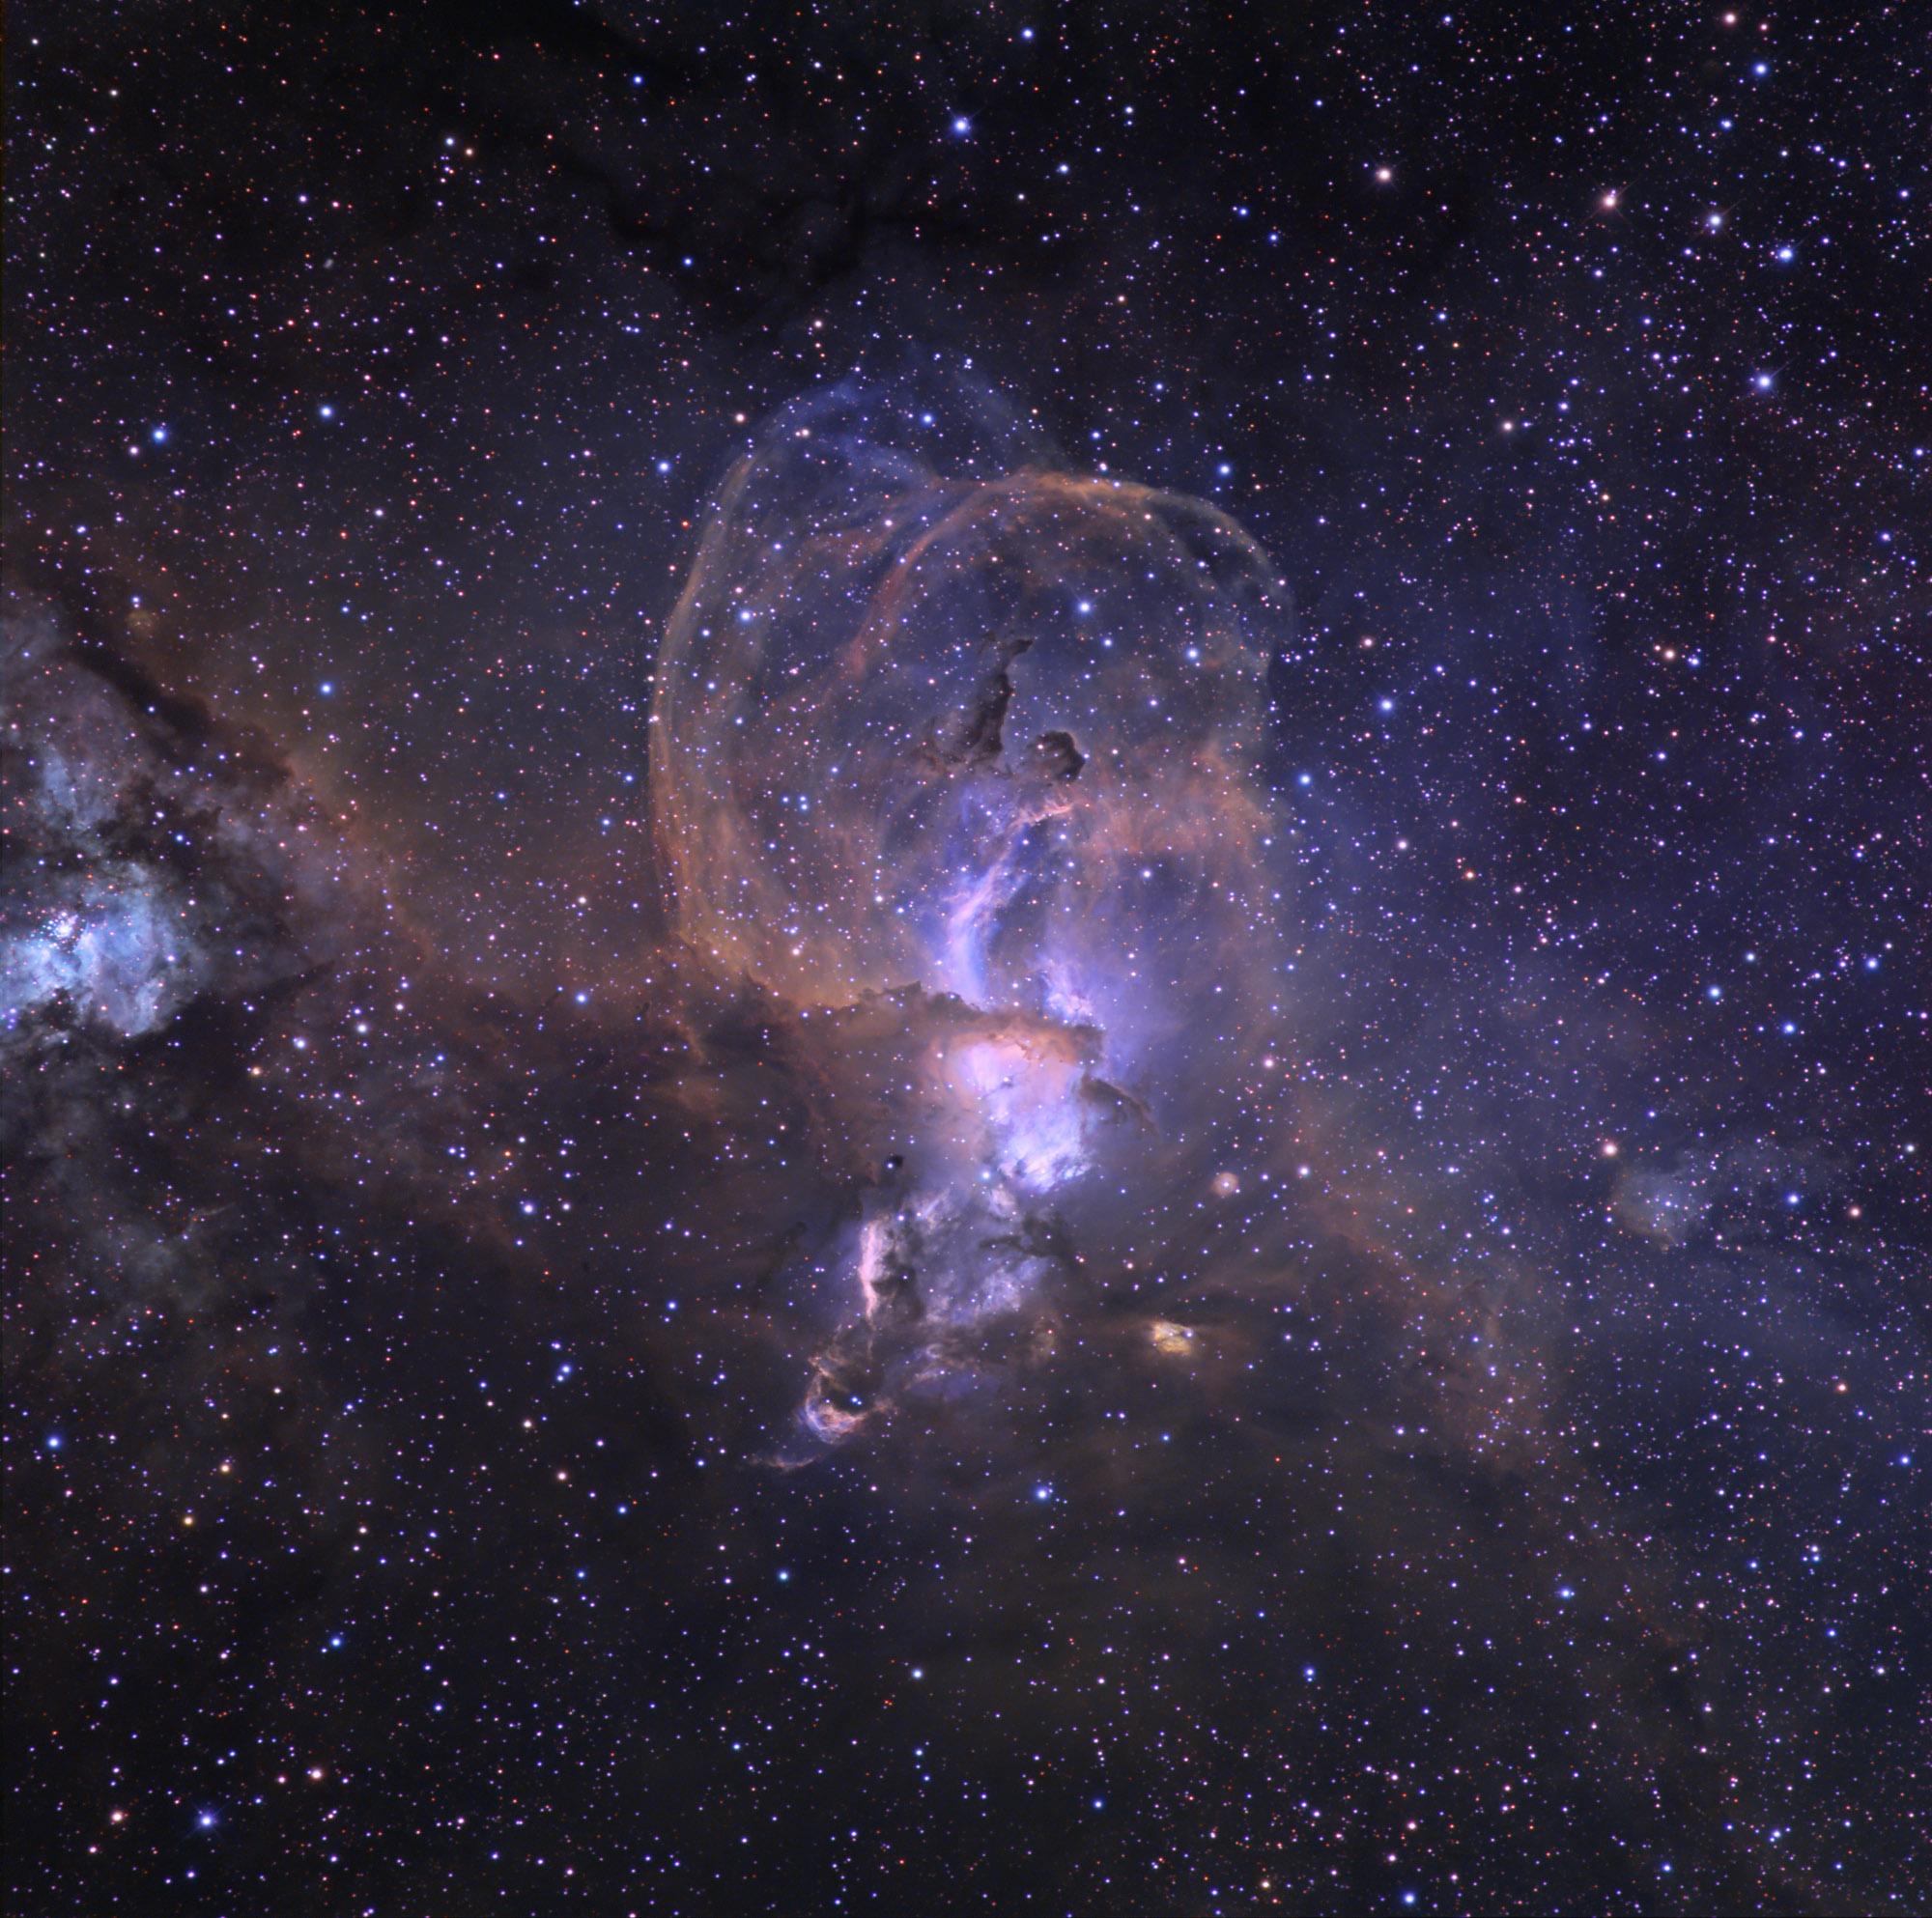 http://www.rcopticalsystems.com/gallery/images/ngc3576.jpg